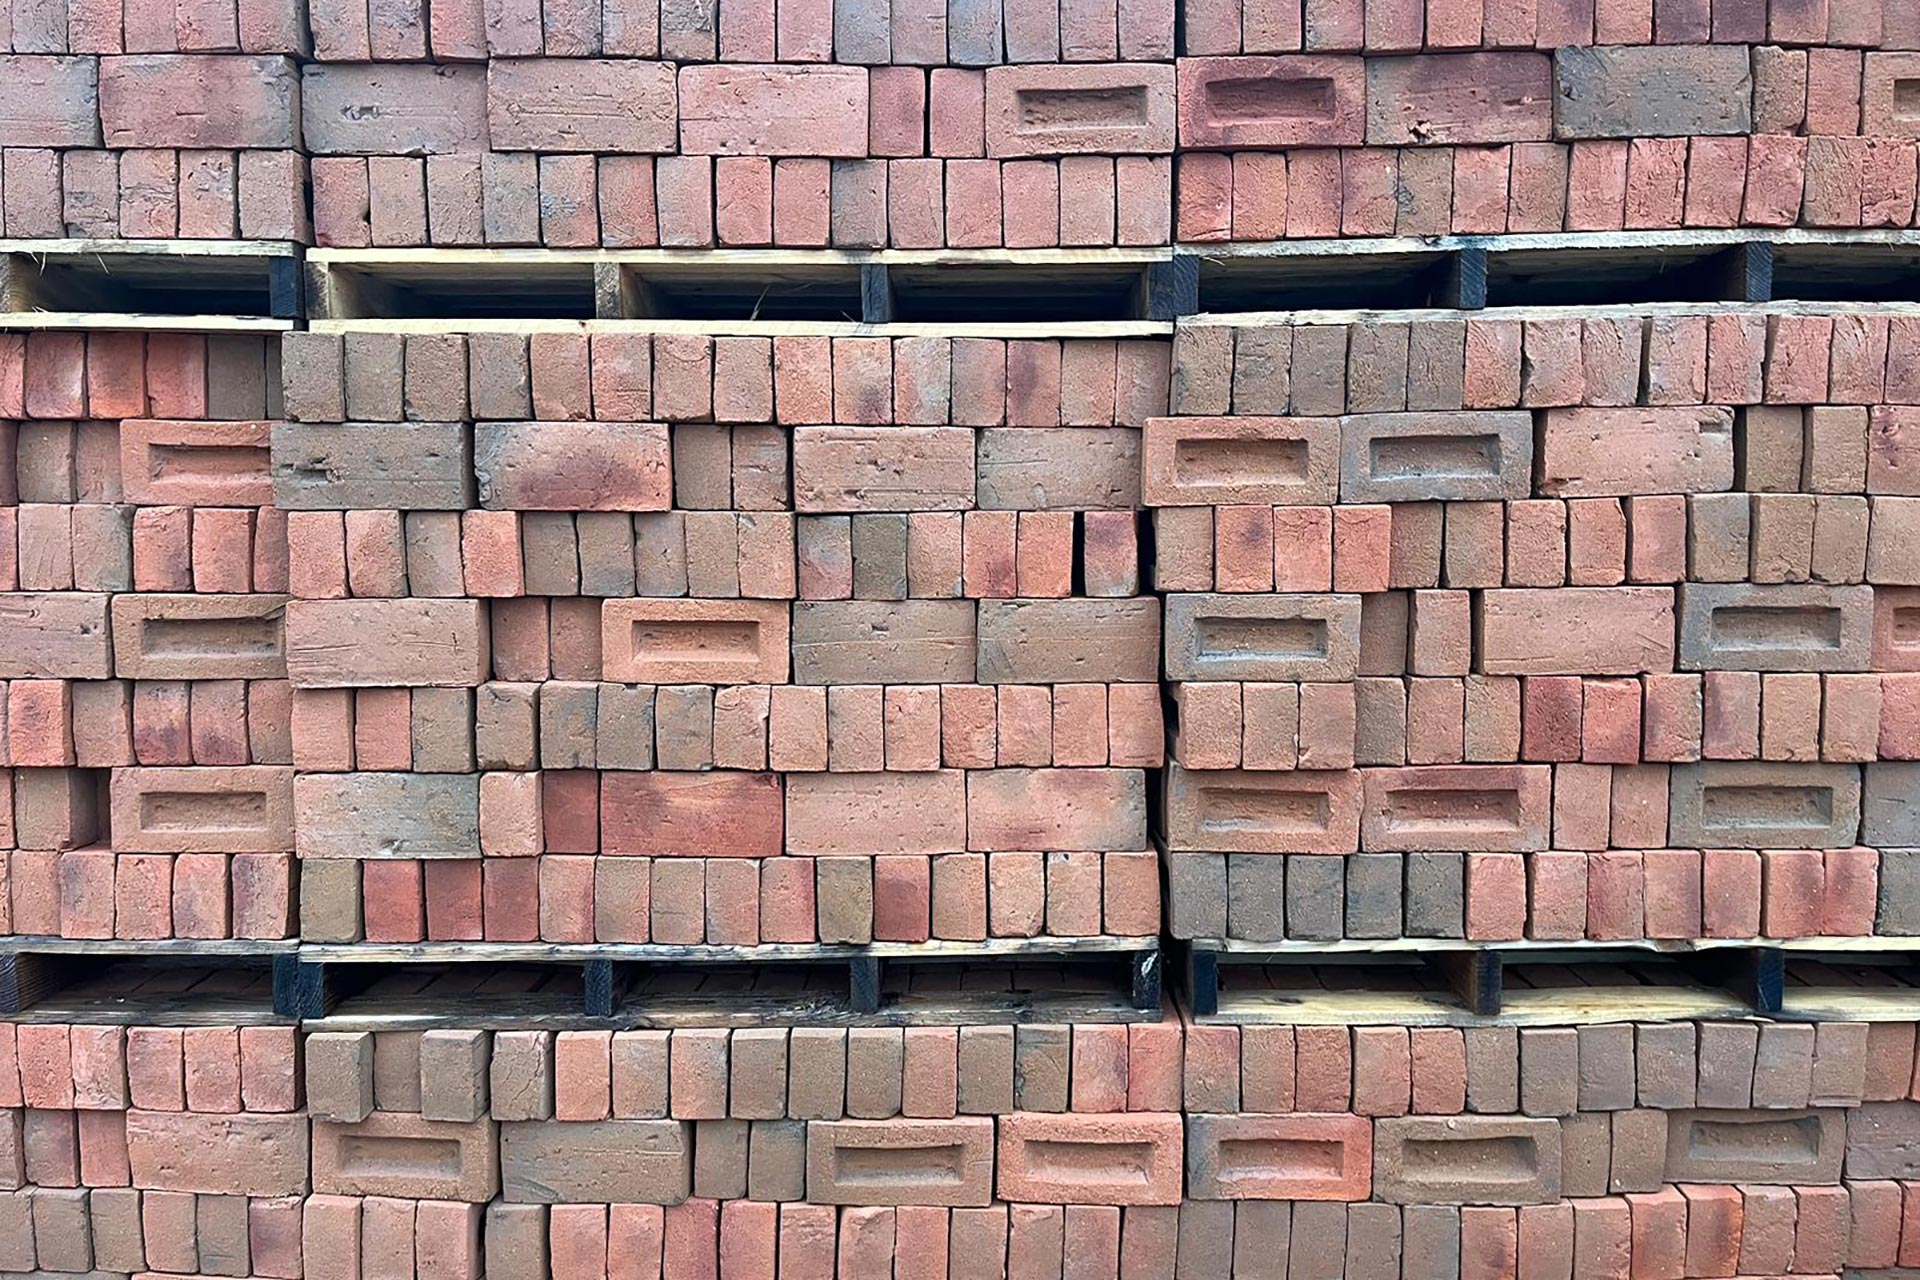 bricks stacked up on pallets